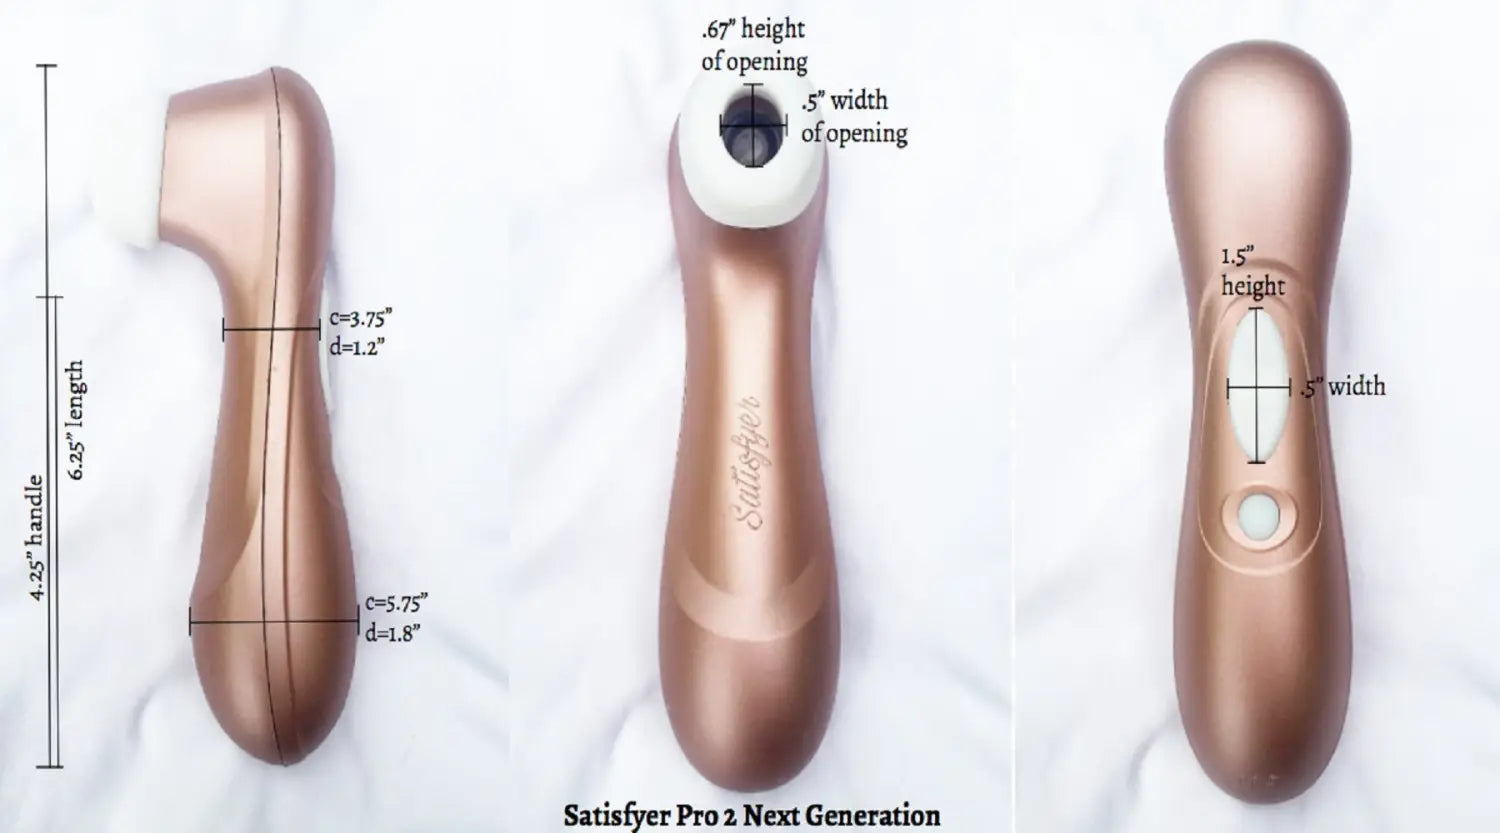 image of a satisfyer pro 2 next gen with dimension measurements